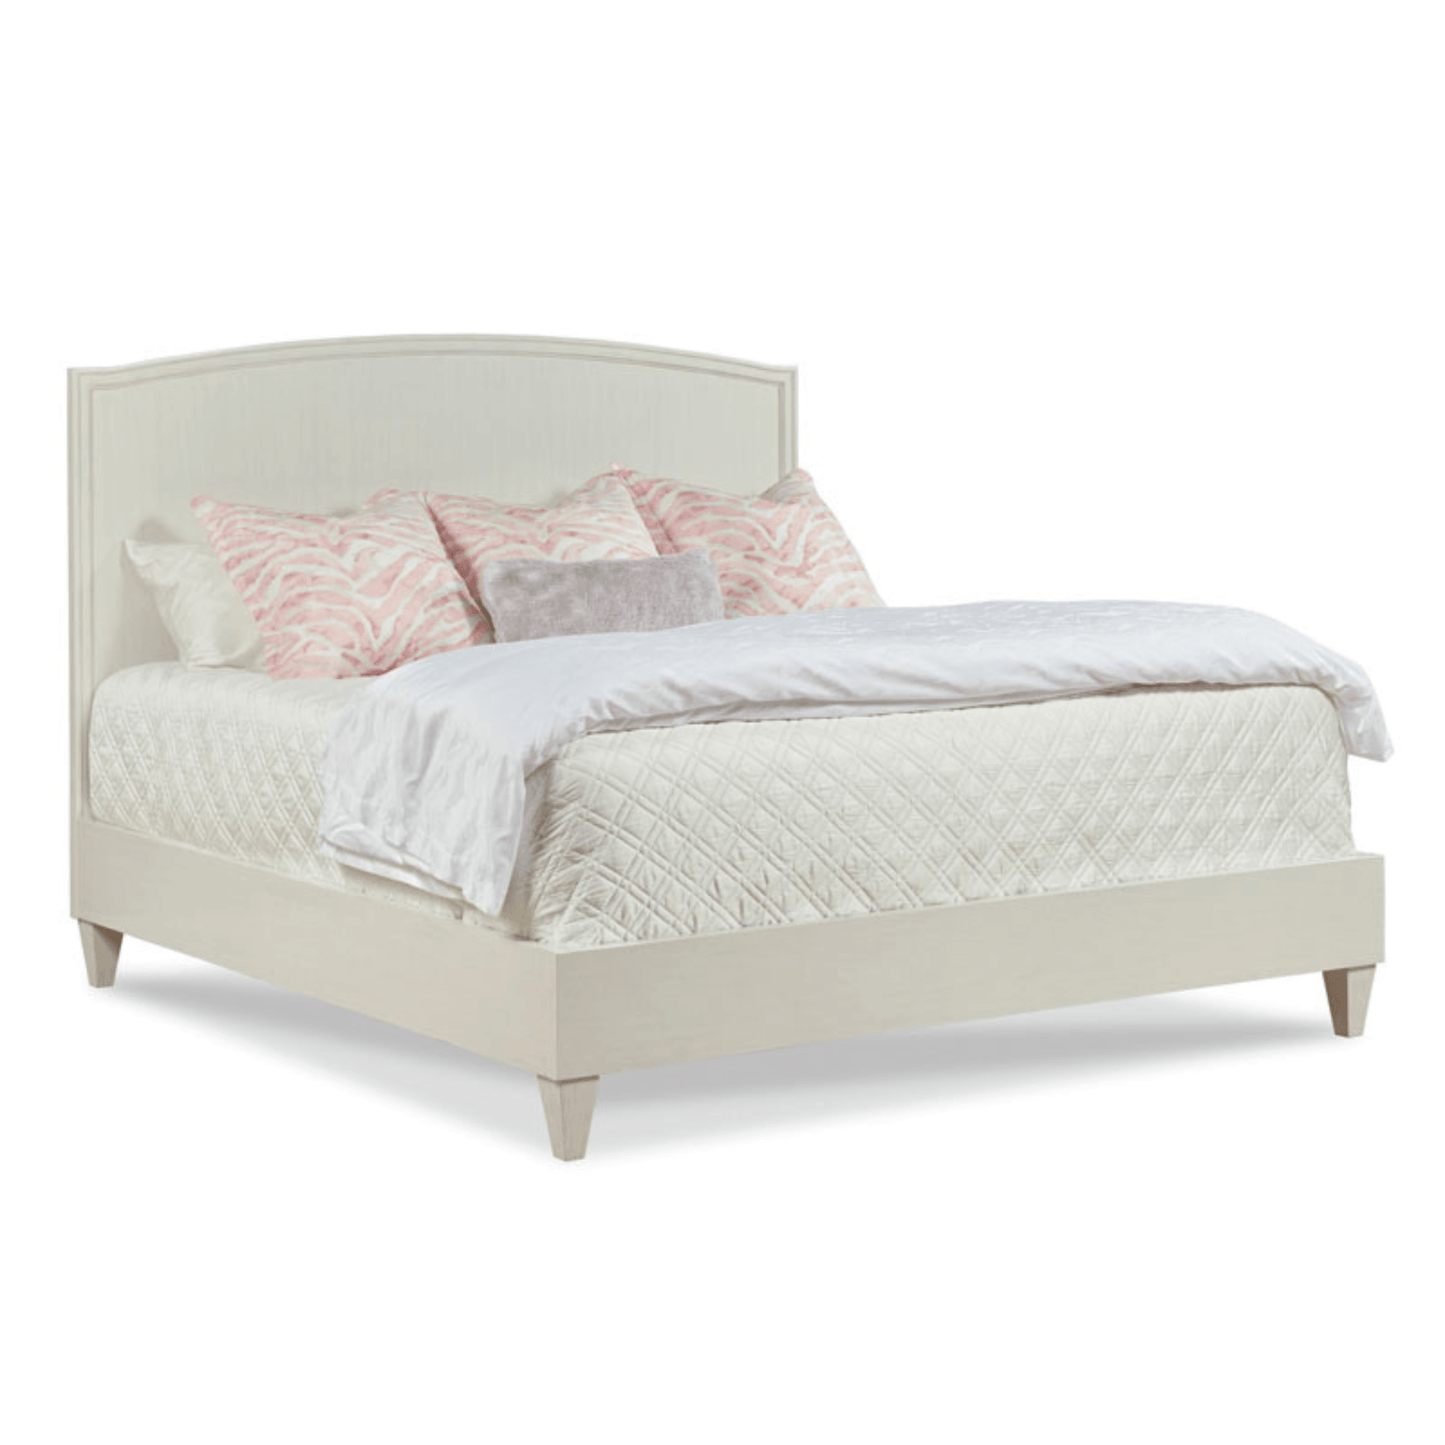 Tranquility Bed - Fairley Fancy 